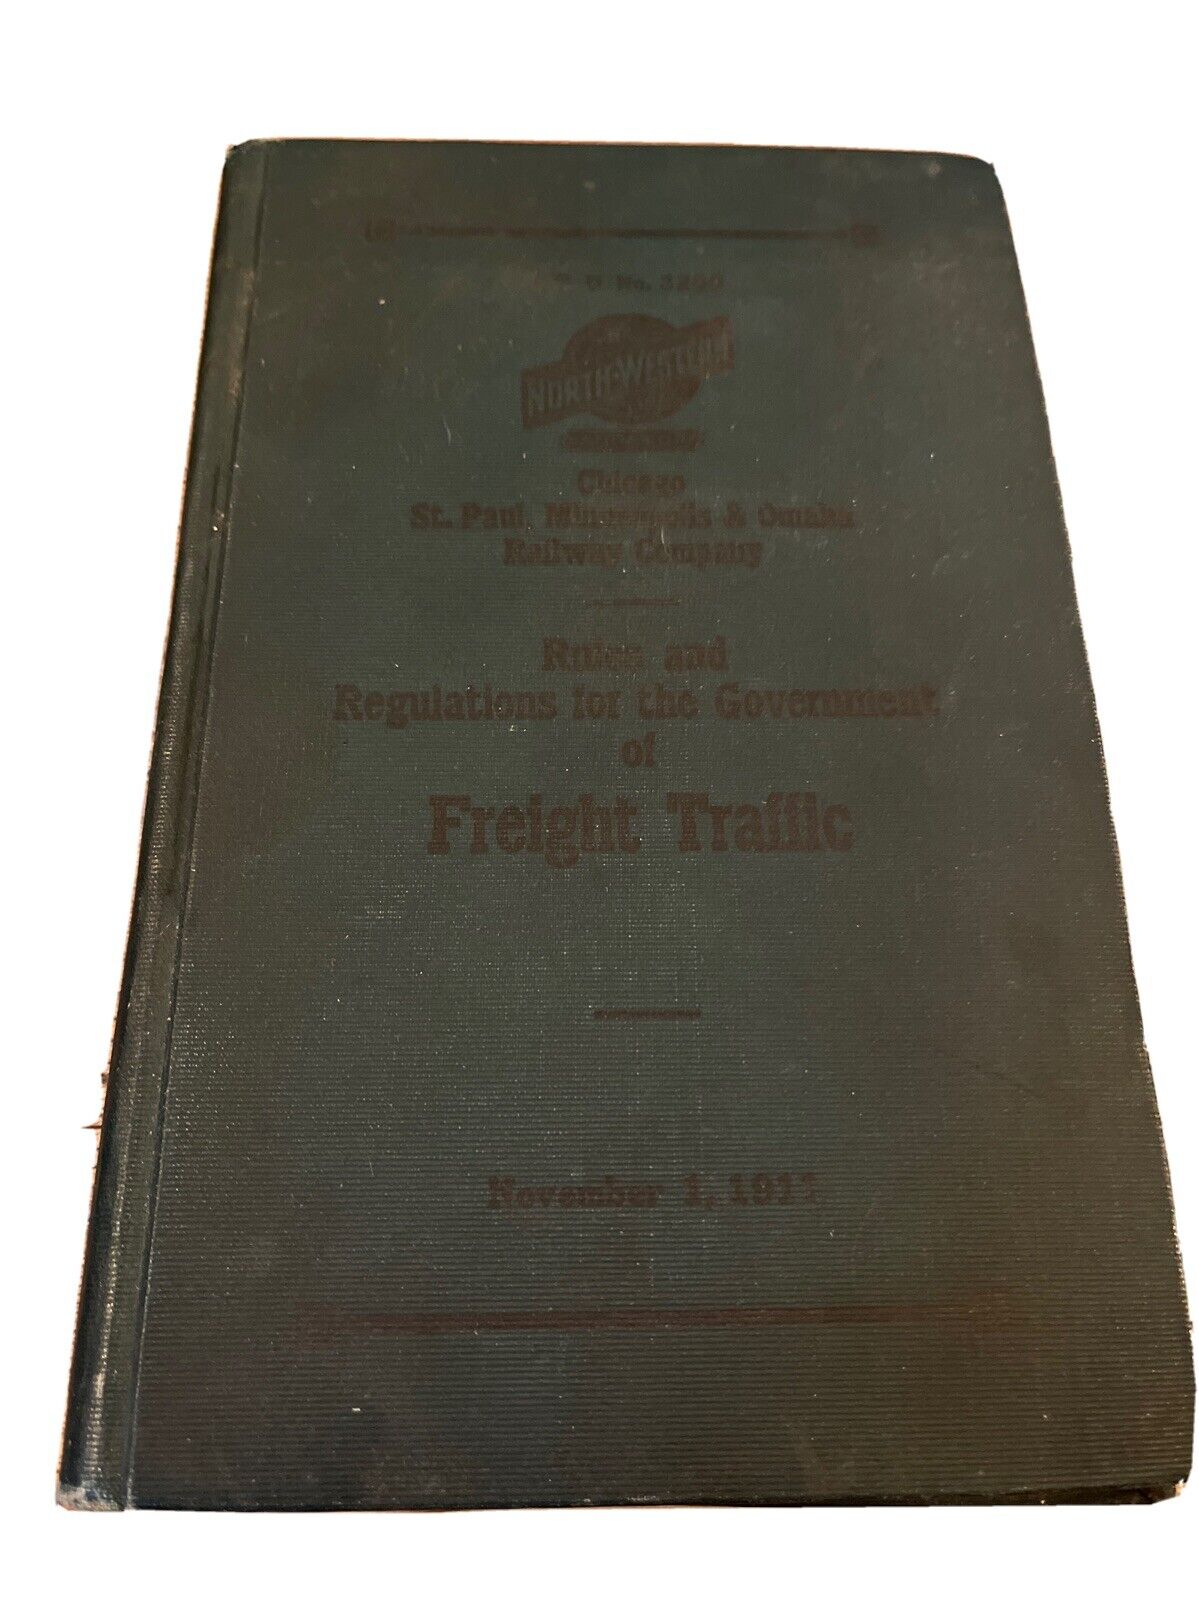 Chicago & North Western rules & regulations, 1911. Solon Springs WI